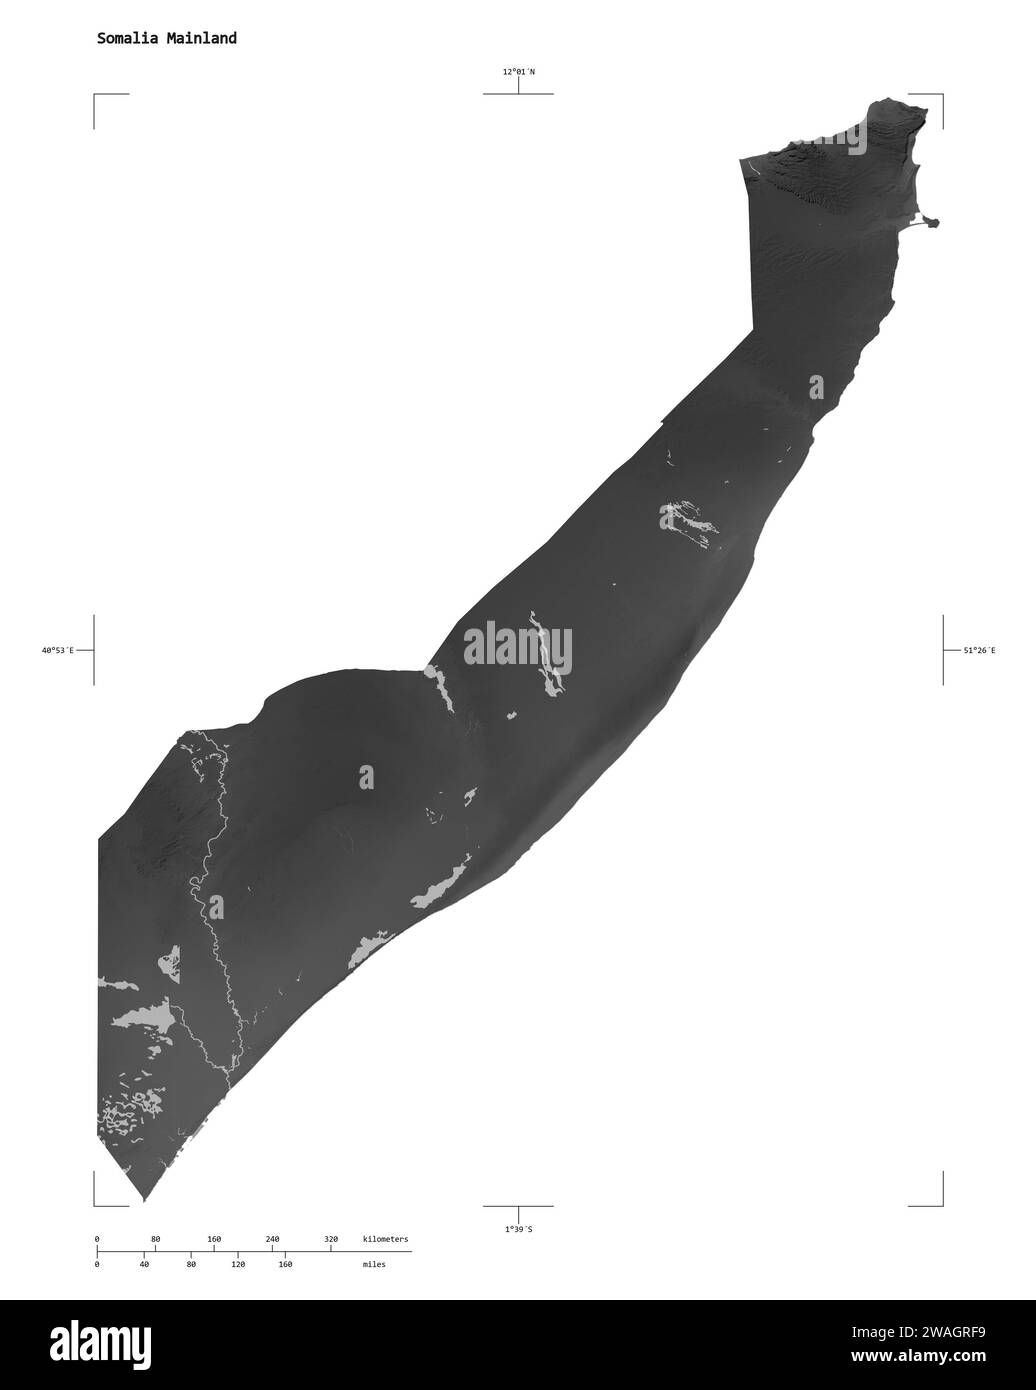 Shape of a Grayscale elevation map with lakes and rivers of the Somalia Mainland, with distance scale and map border coordinates, isolated on white Stock Photo